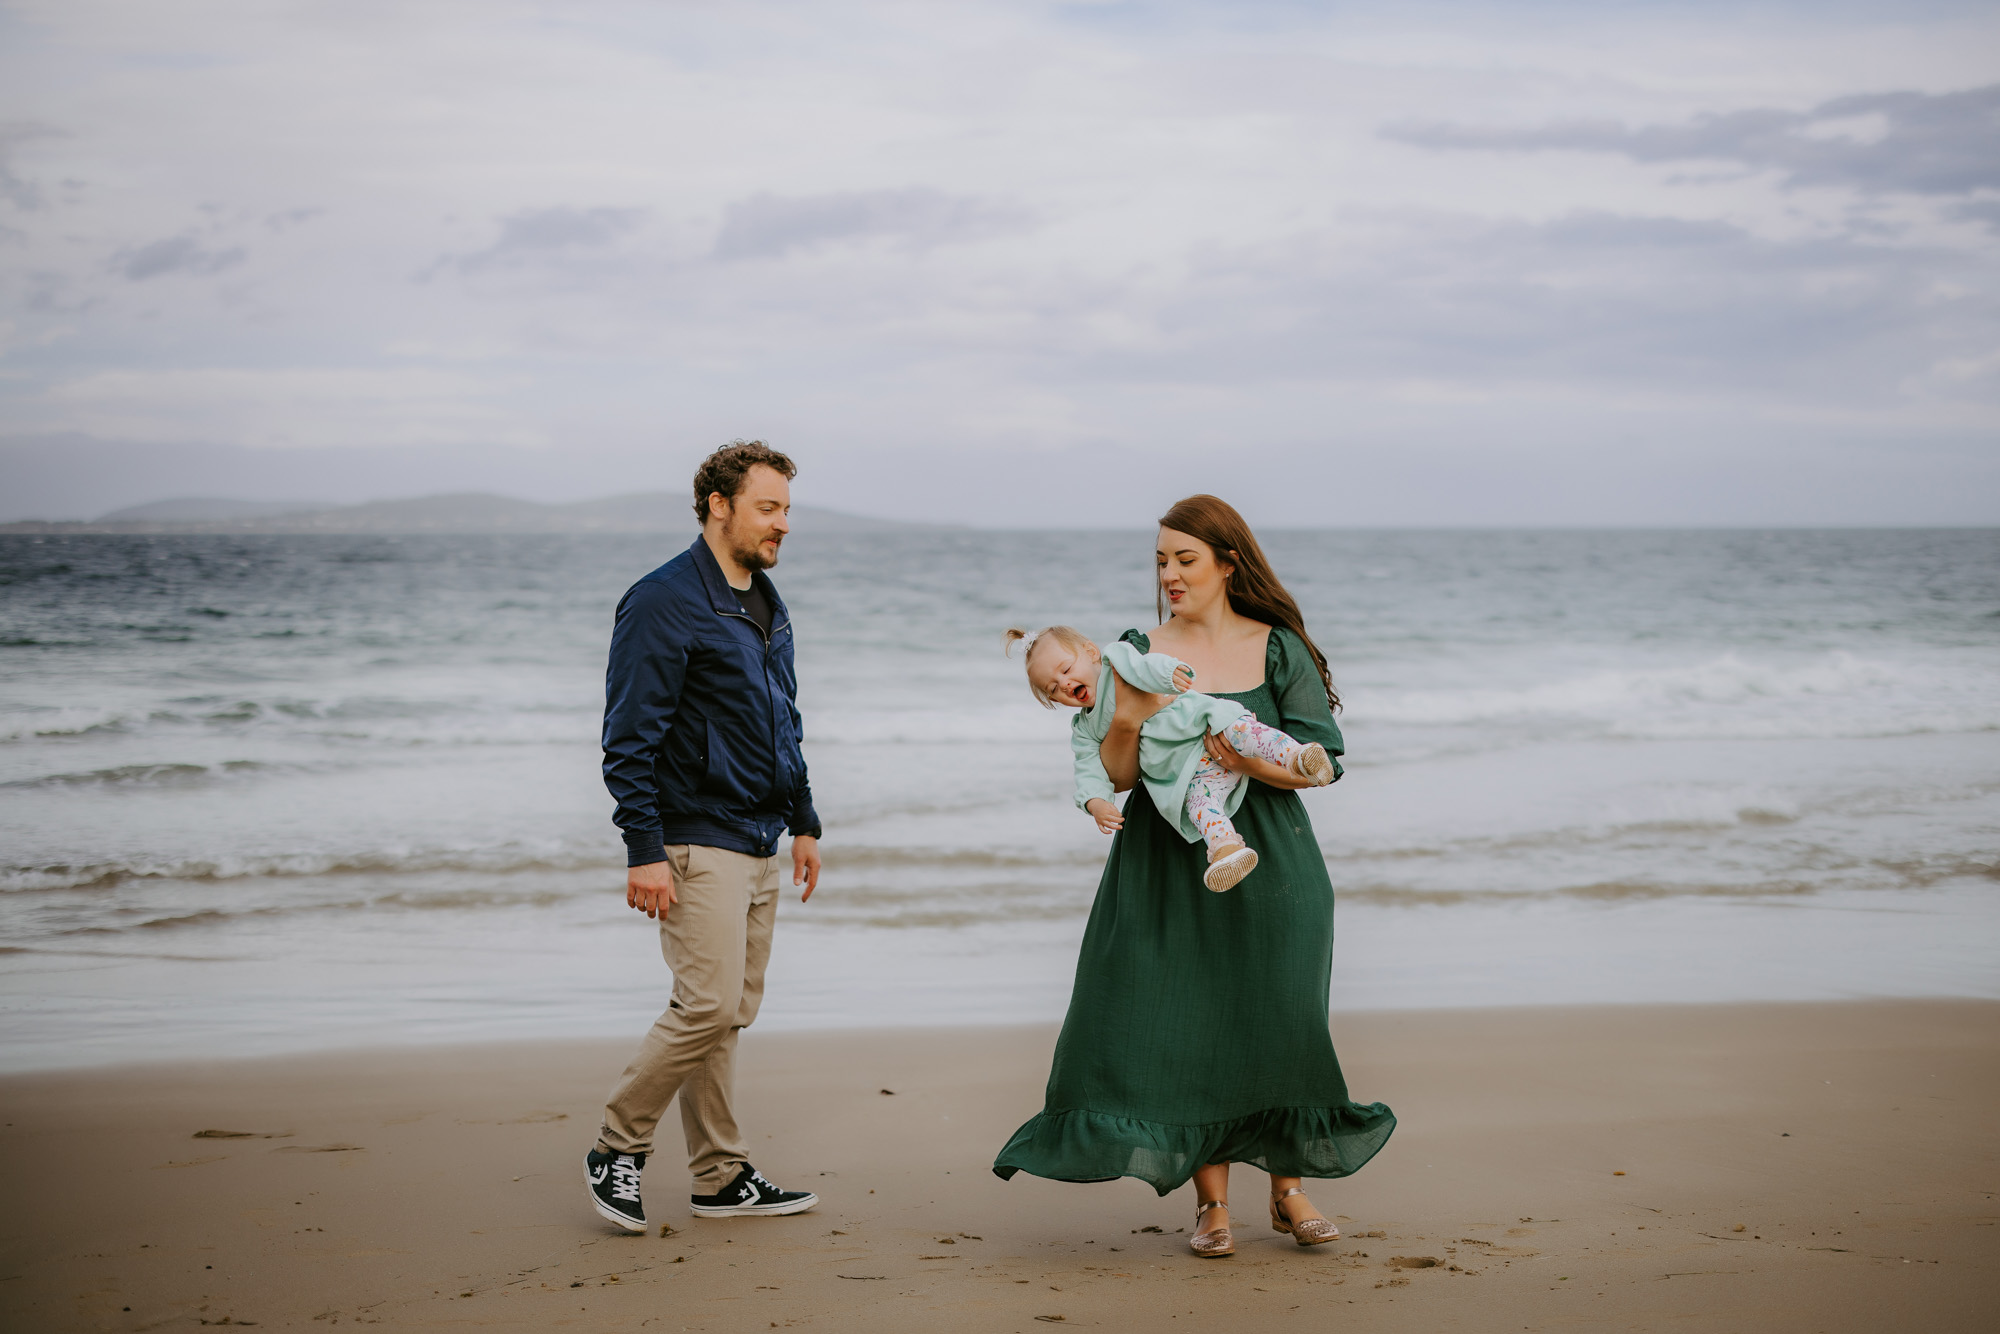 Blackmans Bay Beach Family by Ulla Nordwood – 0043